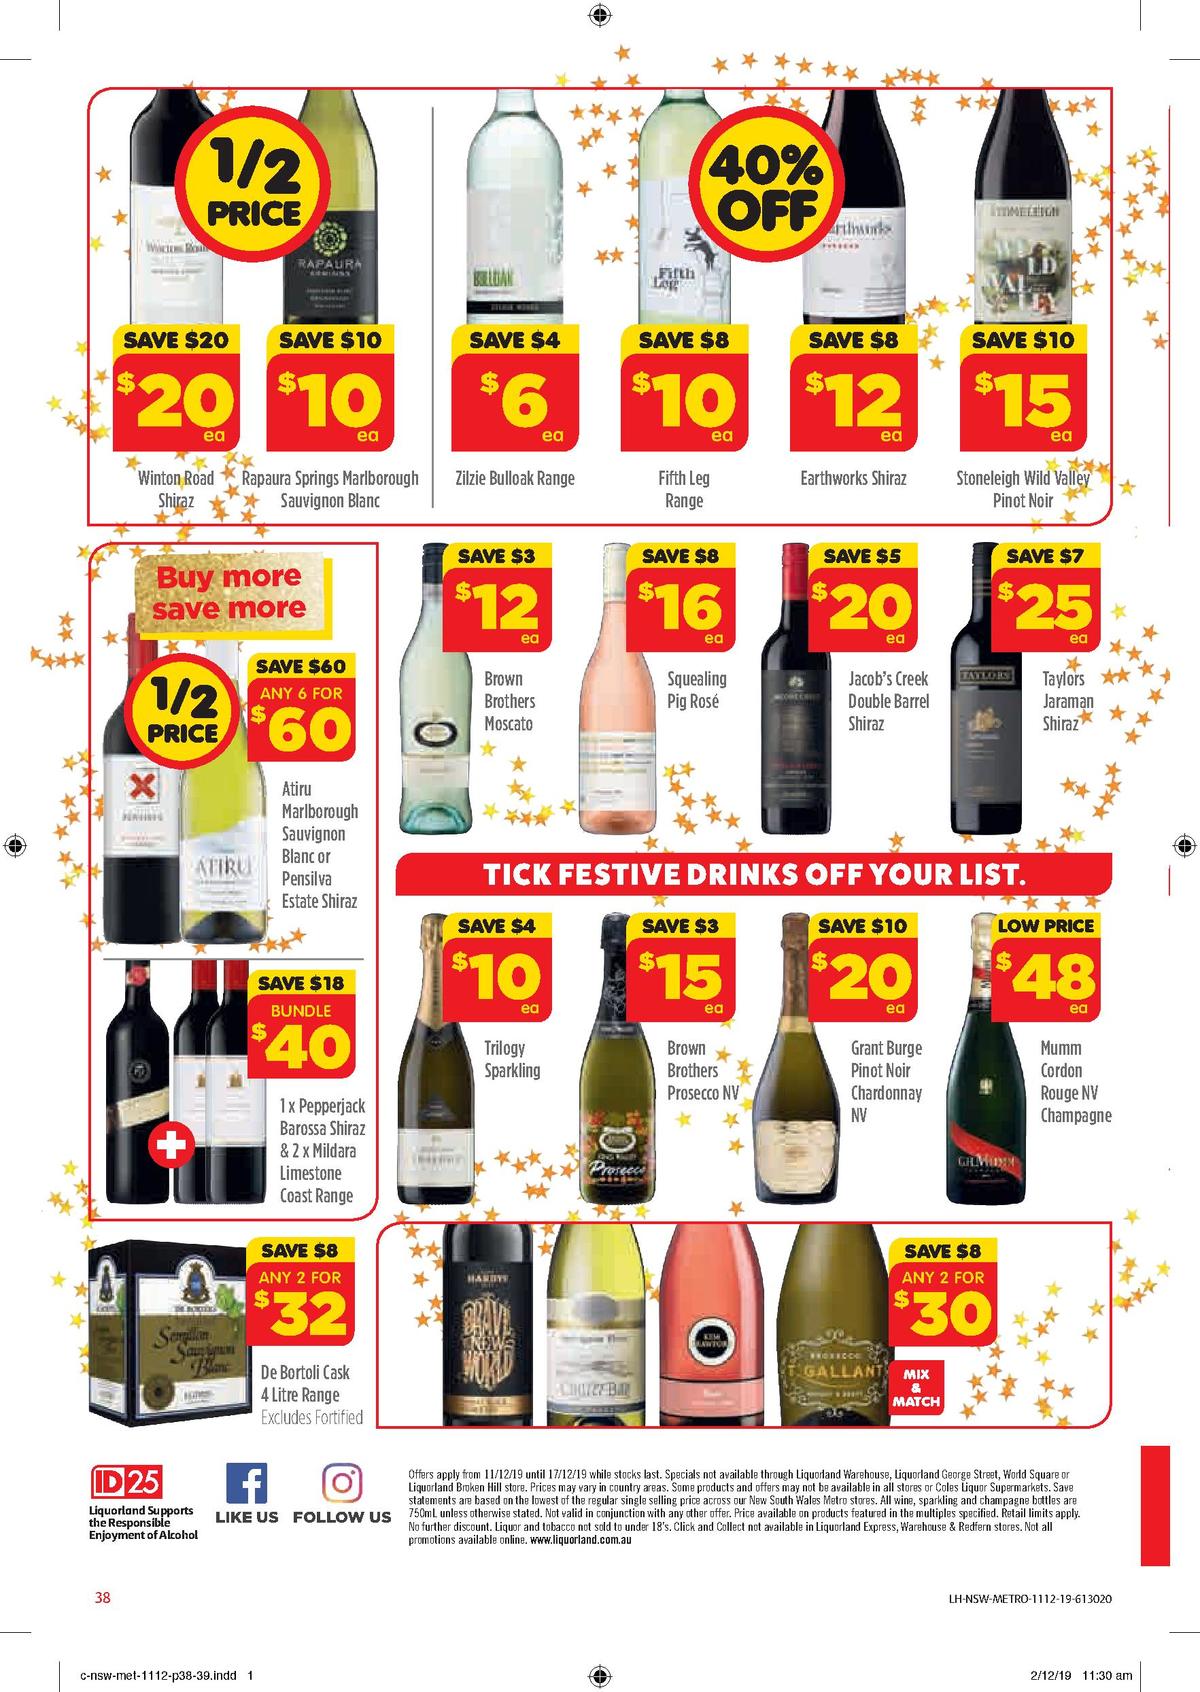 Coles Catalogues from 11 December